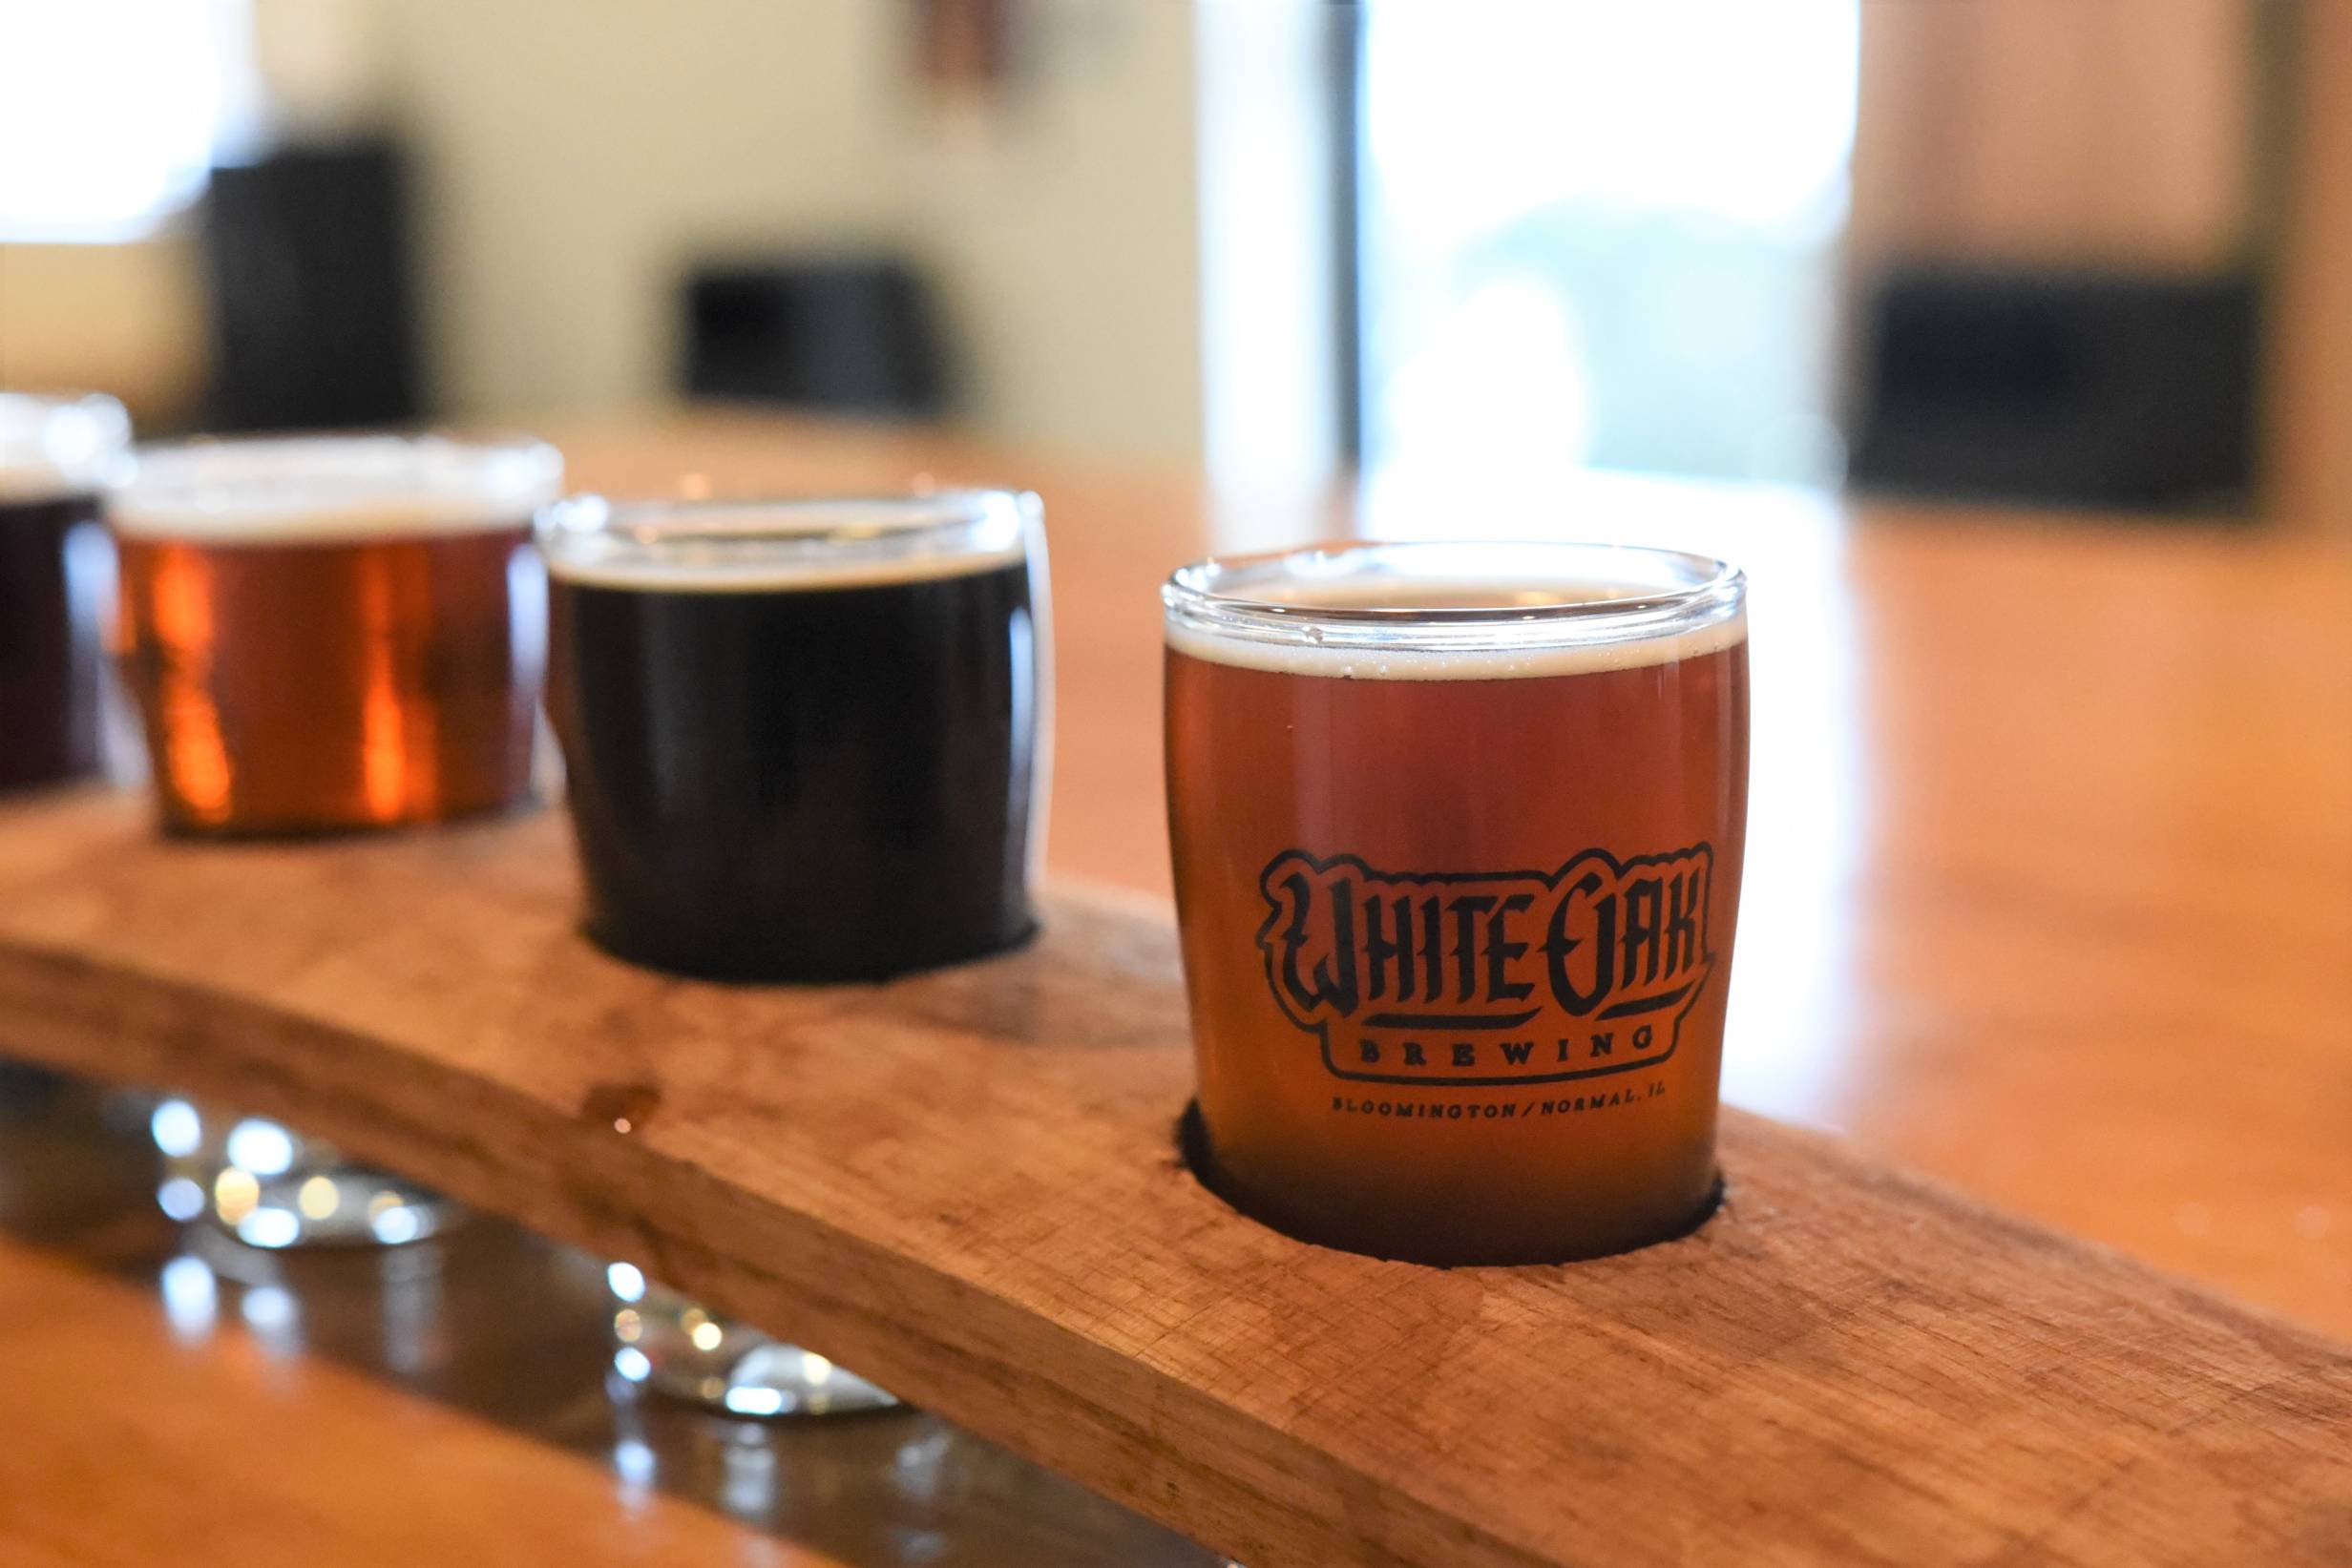 A flight of White Oak beer comprised of their amber ale, dark wheat, and stout. The flight is on a wooden table inside of the brewery. Photo by Jordan Goebig